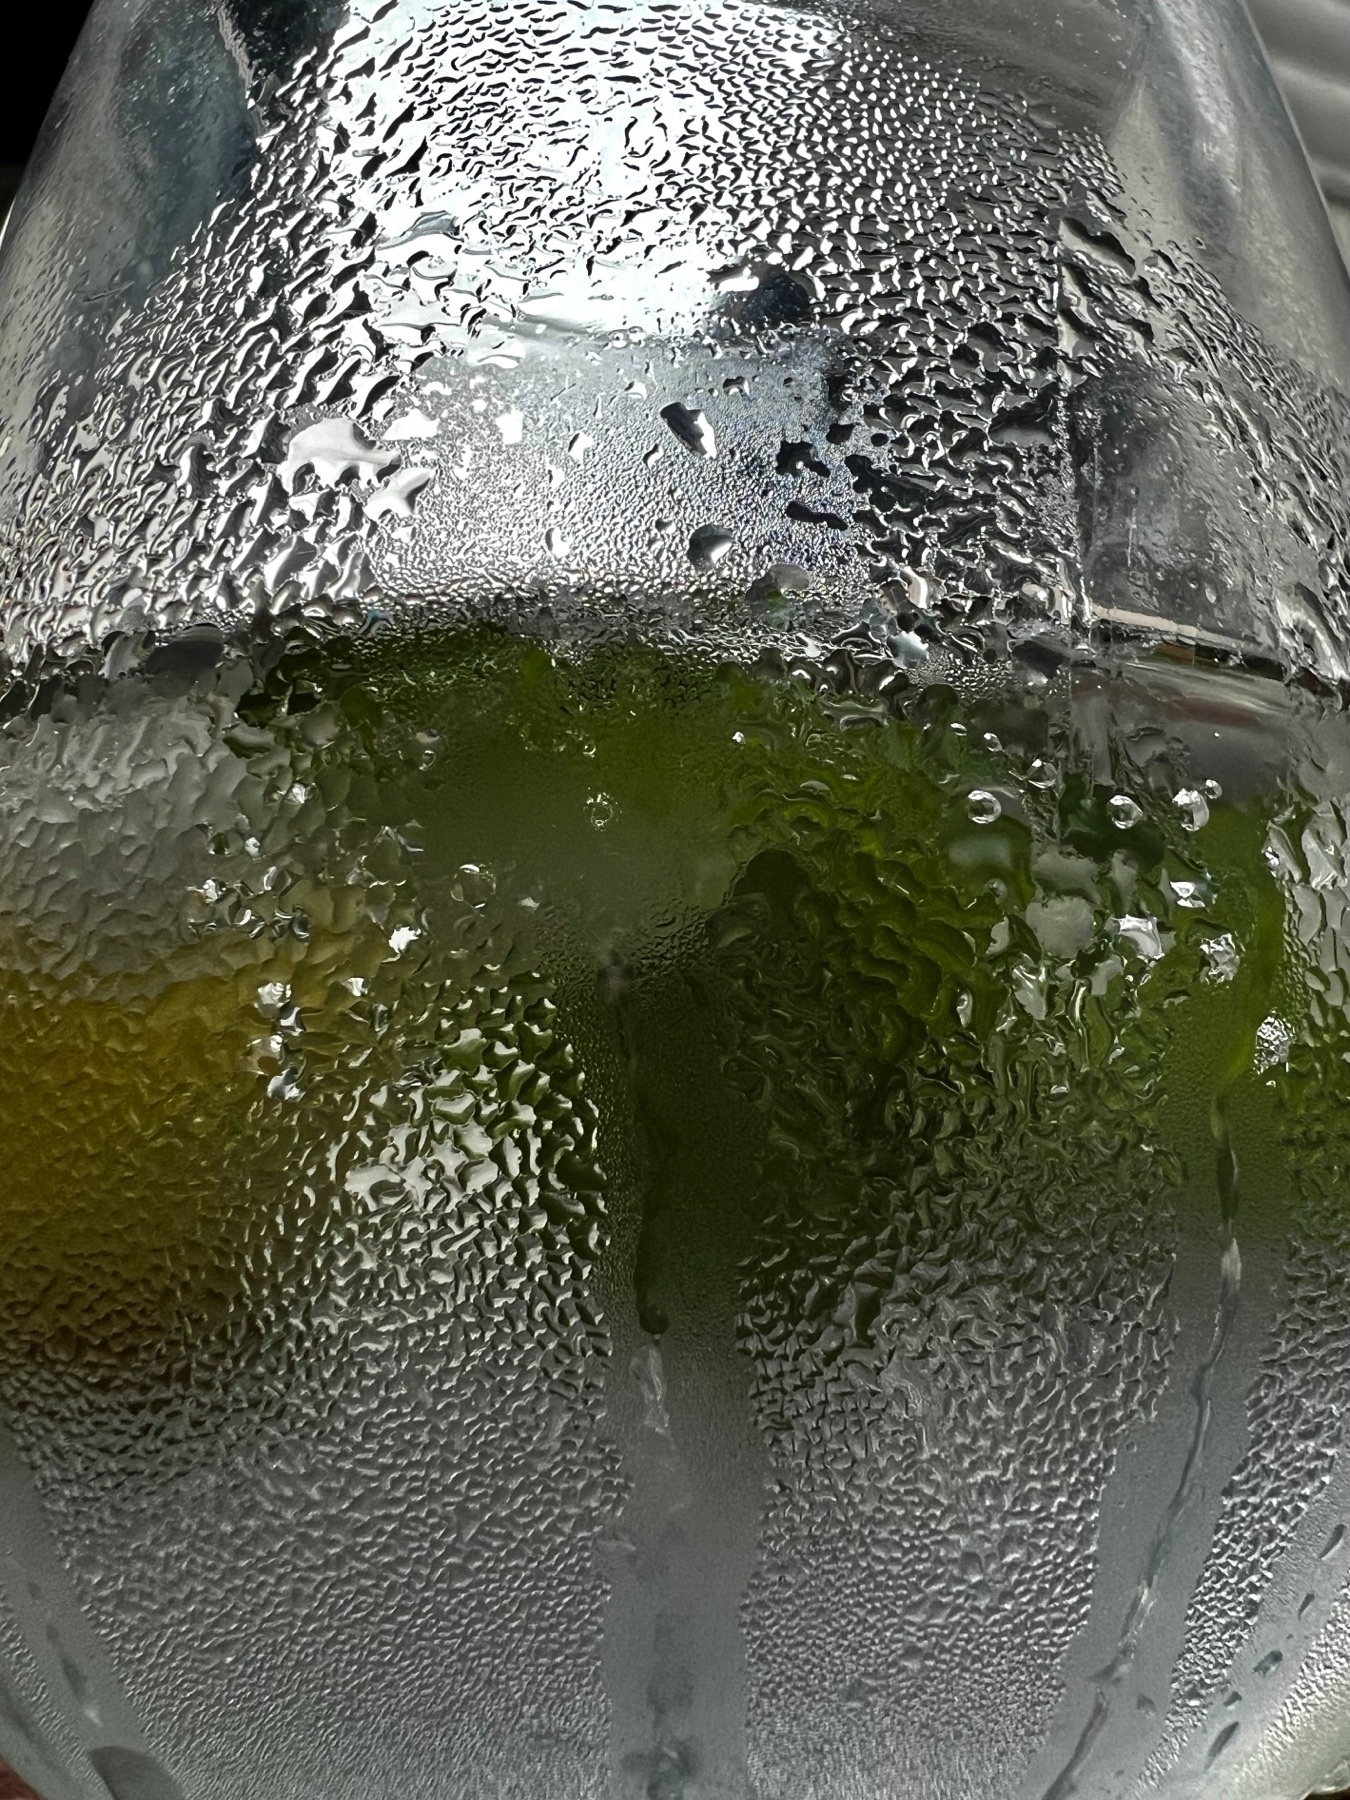 A very close up view of a cup with condensation on the side, with ice and mint inside the glass from a Gin and Tonic.